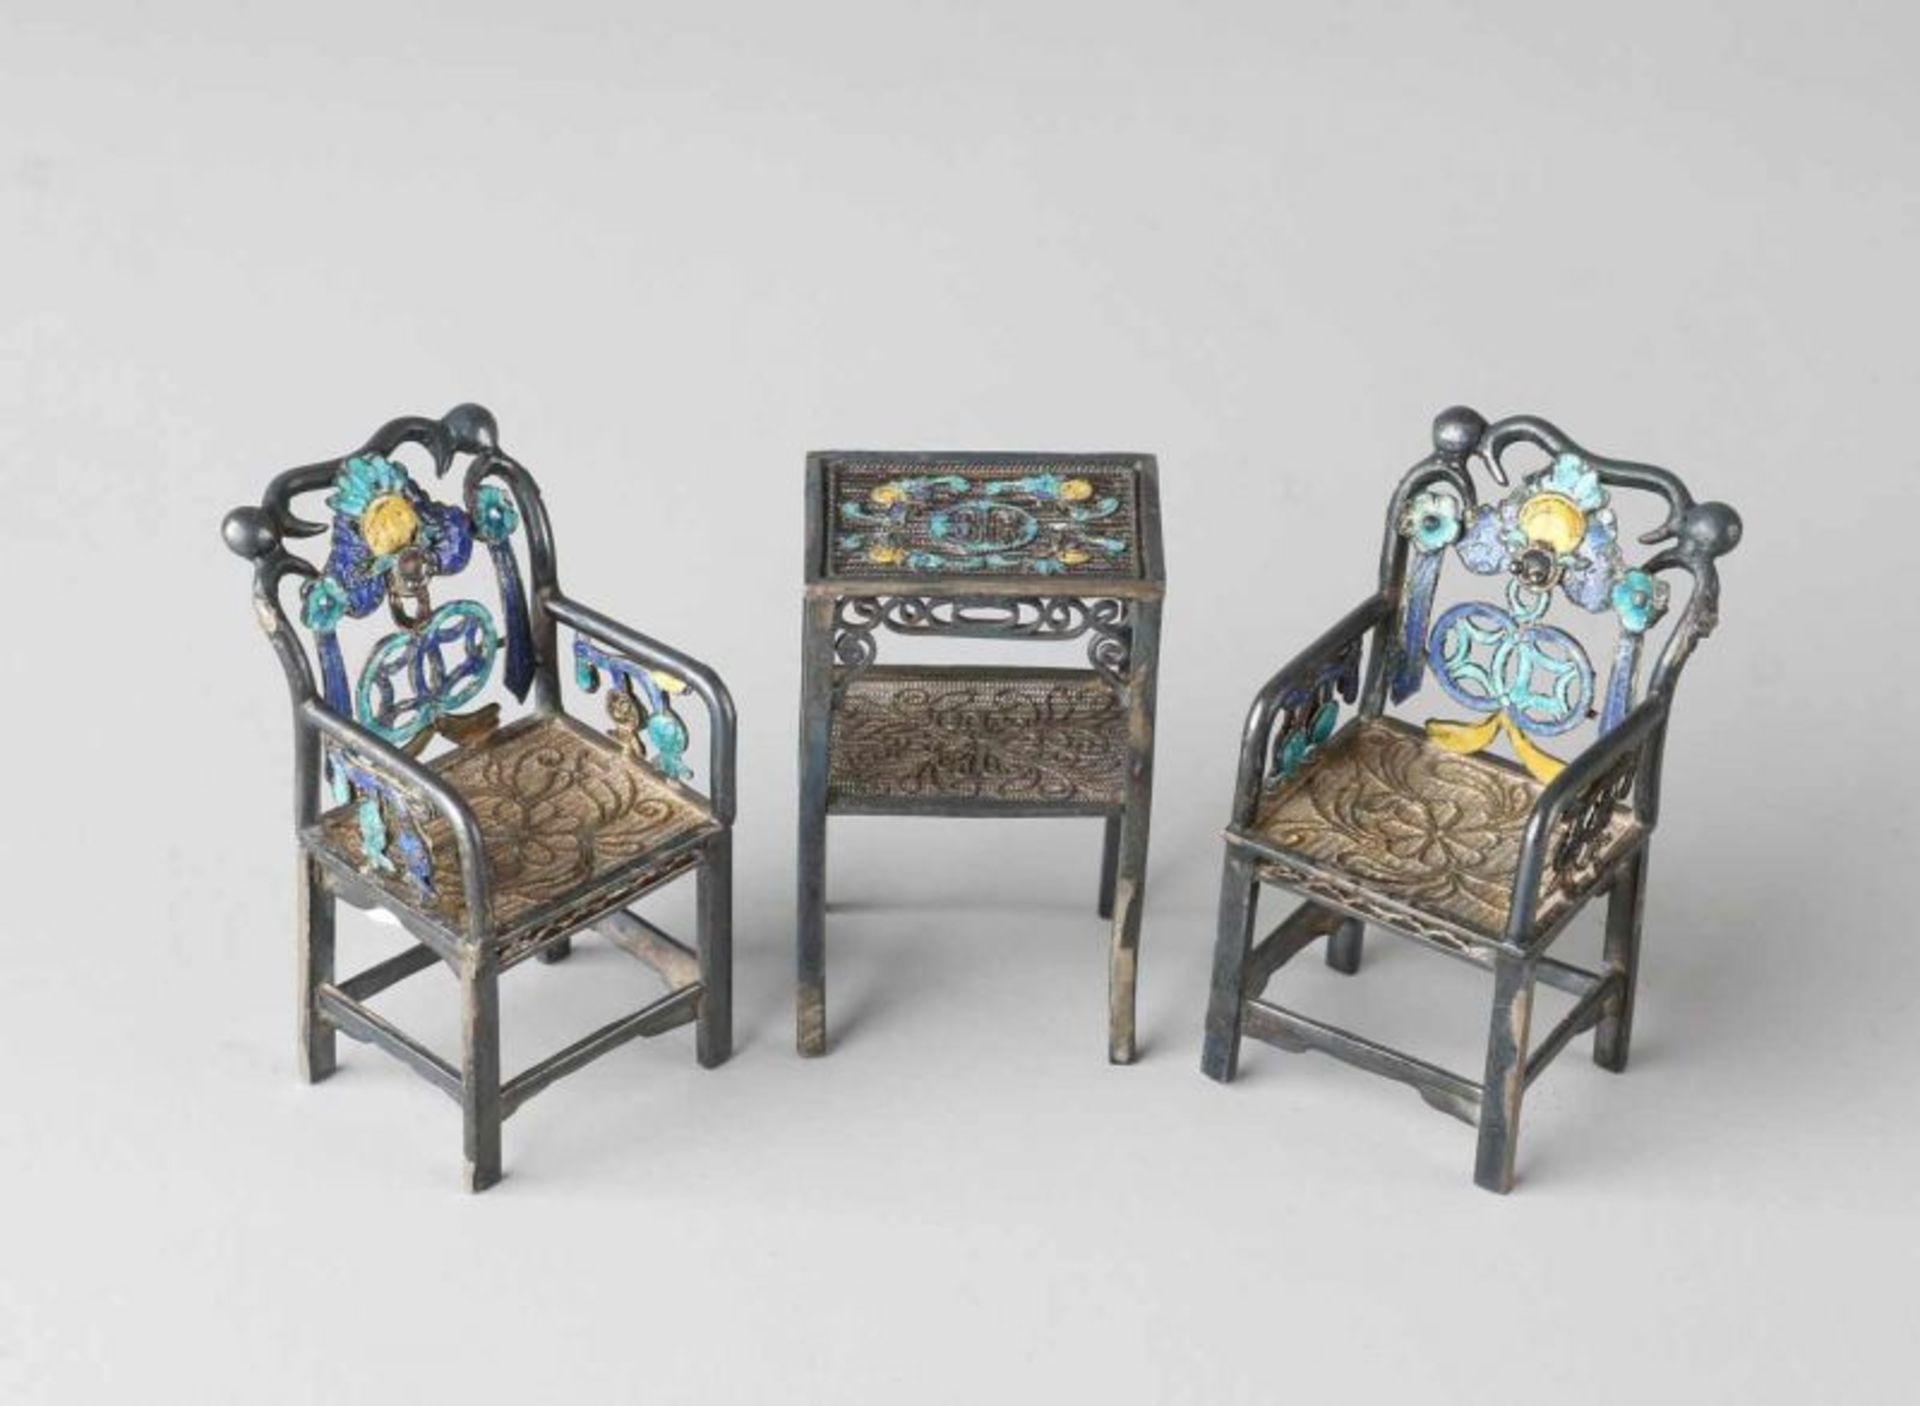 Three rare antique silver Chinese miniature furniture with cloisonne and partly gilt. Consisting of: